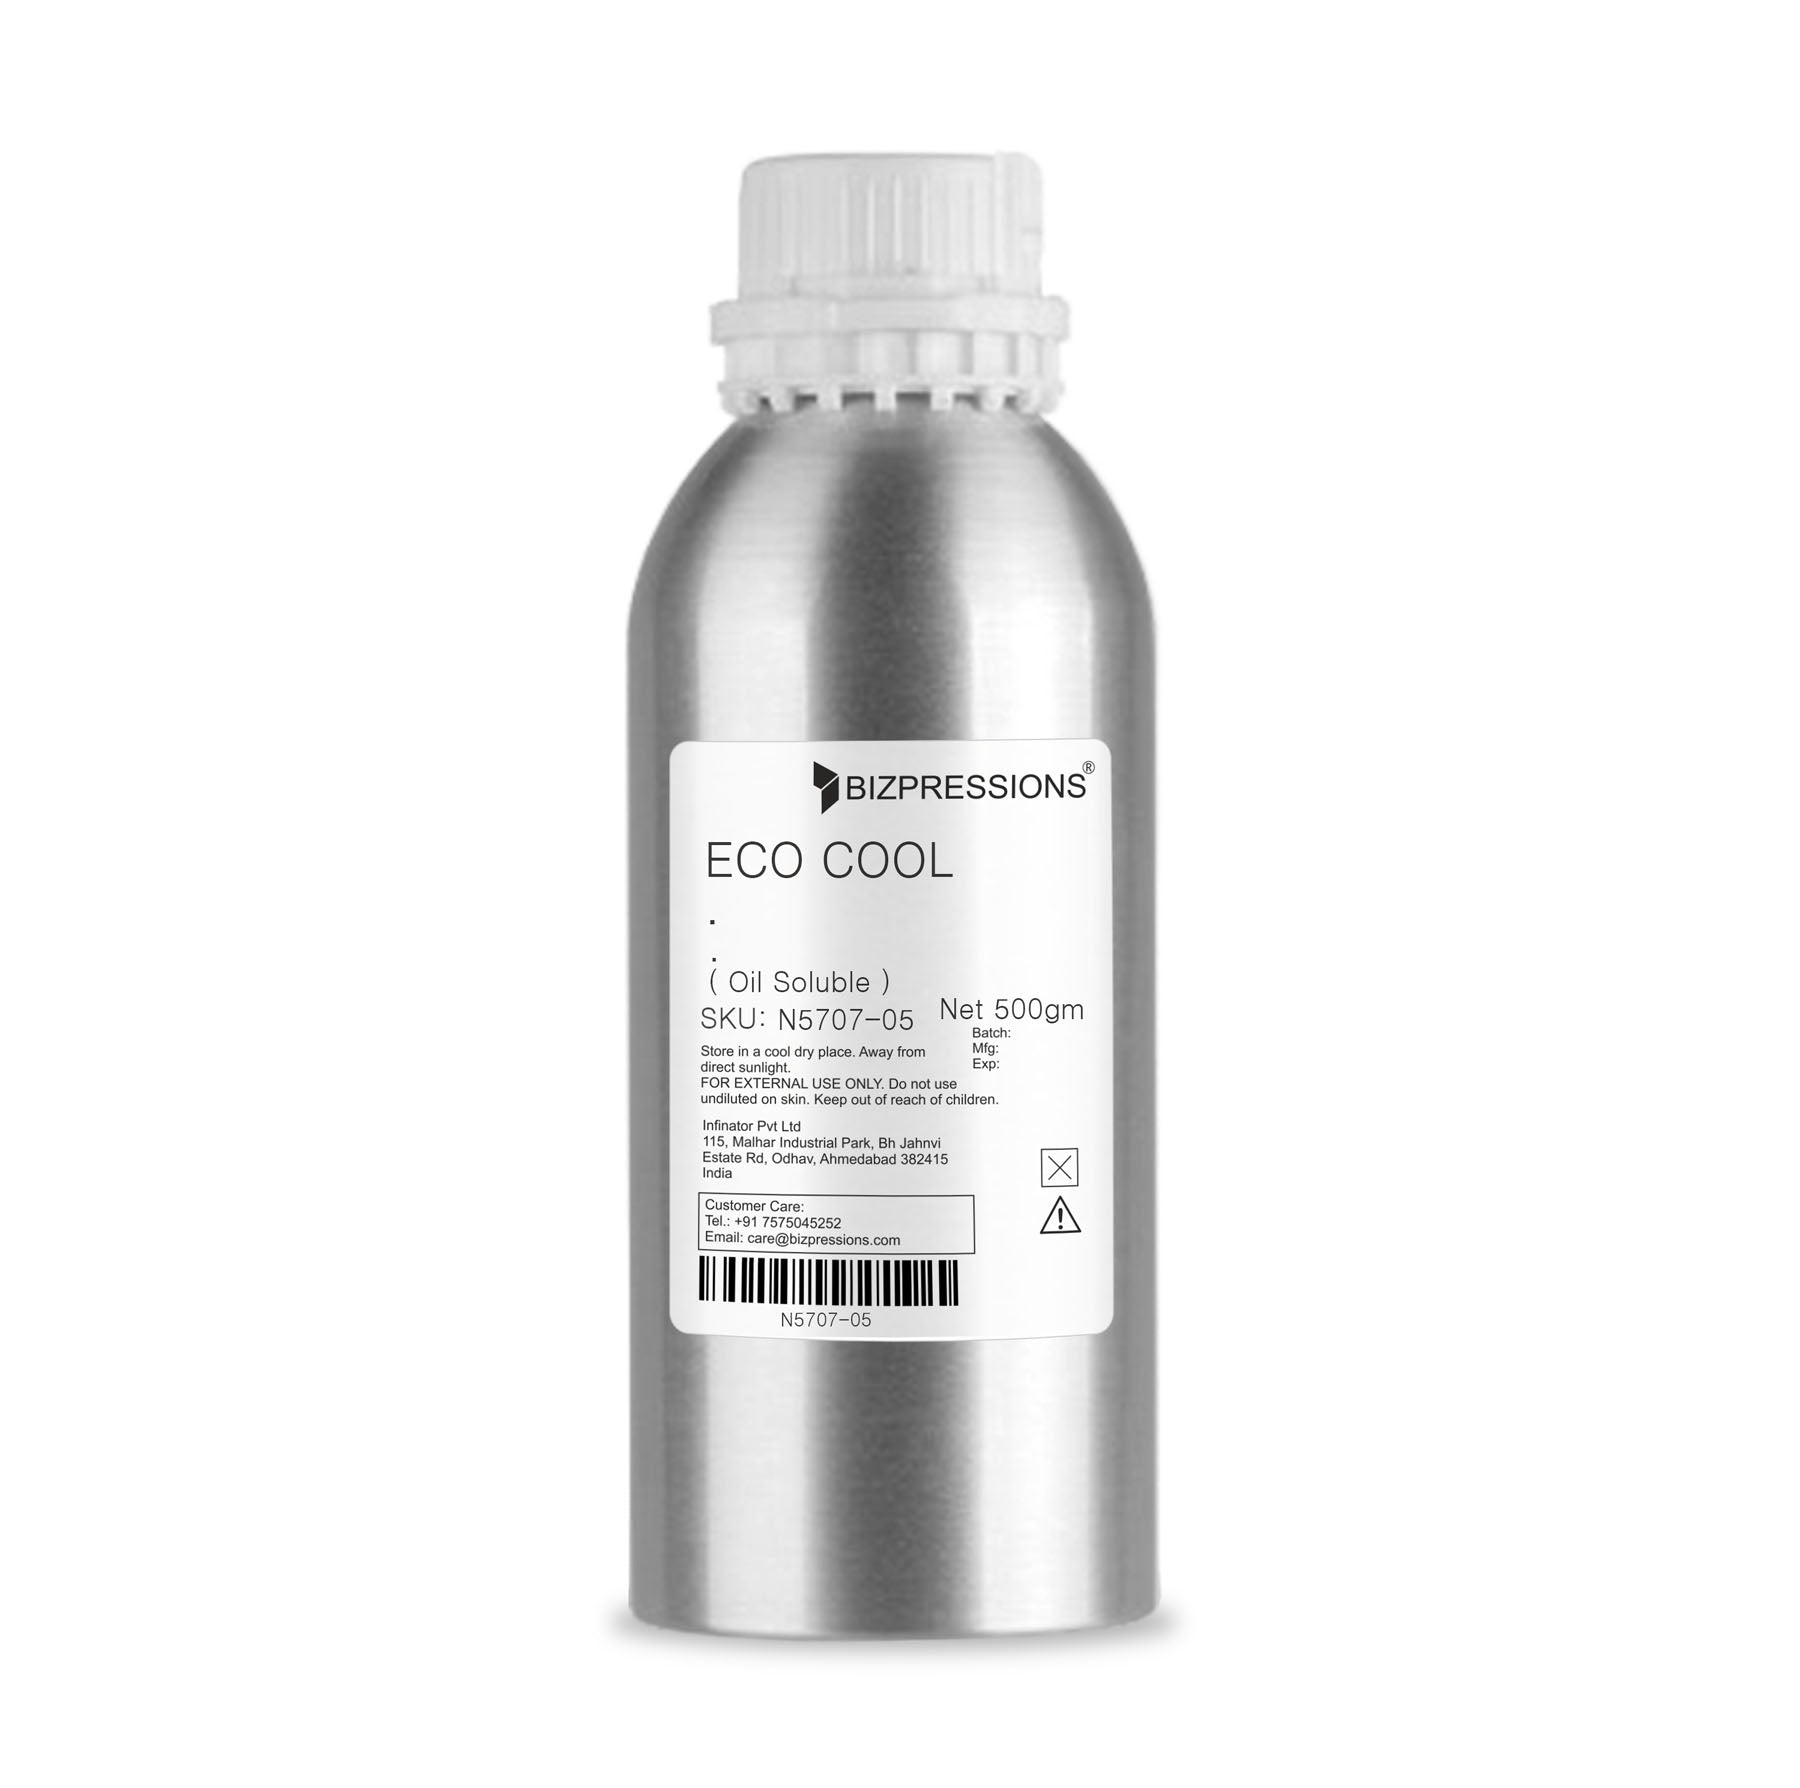 ECO COOL - Fragrance ( Oil Soluble ) - 500 gm